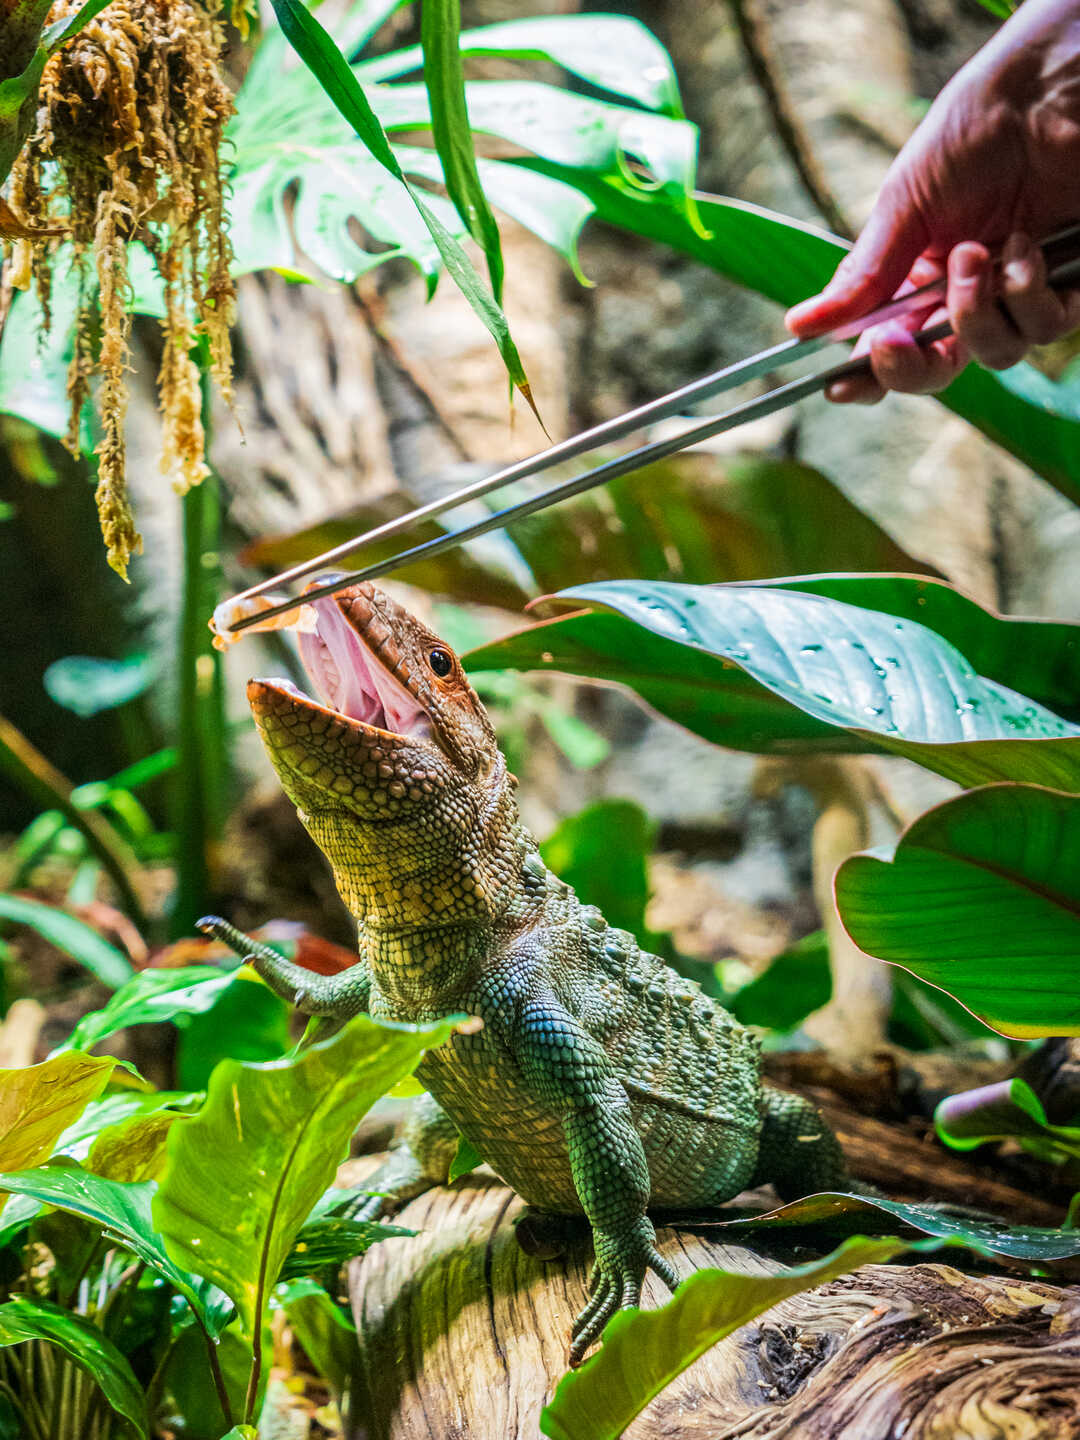 Caiman lizard accepting food from a large pair of tweezers held by a Steinhart Aquarium biologist. Photo by Gayle Laird